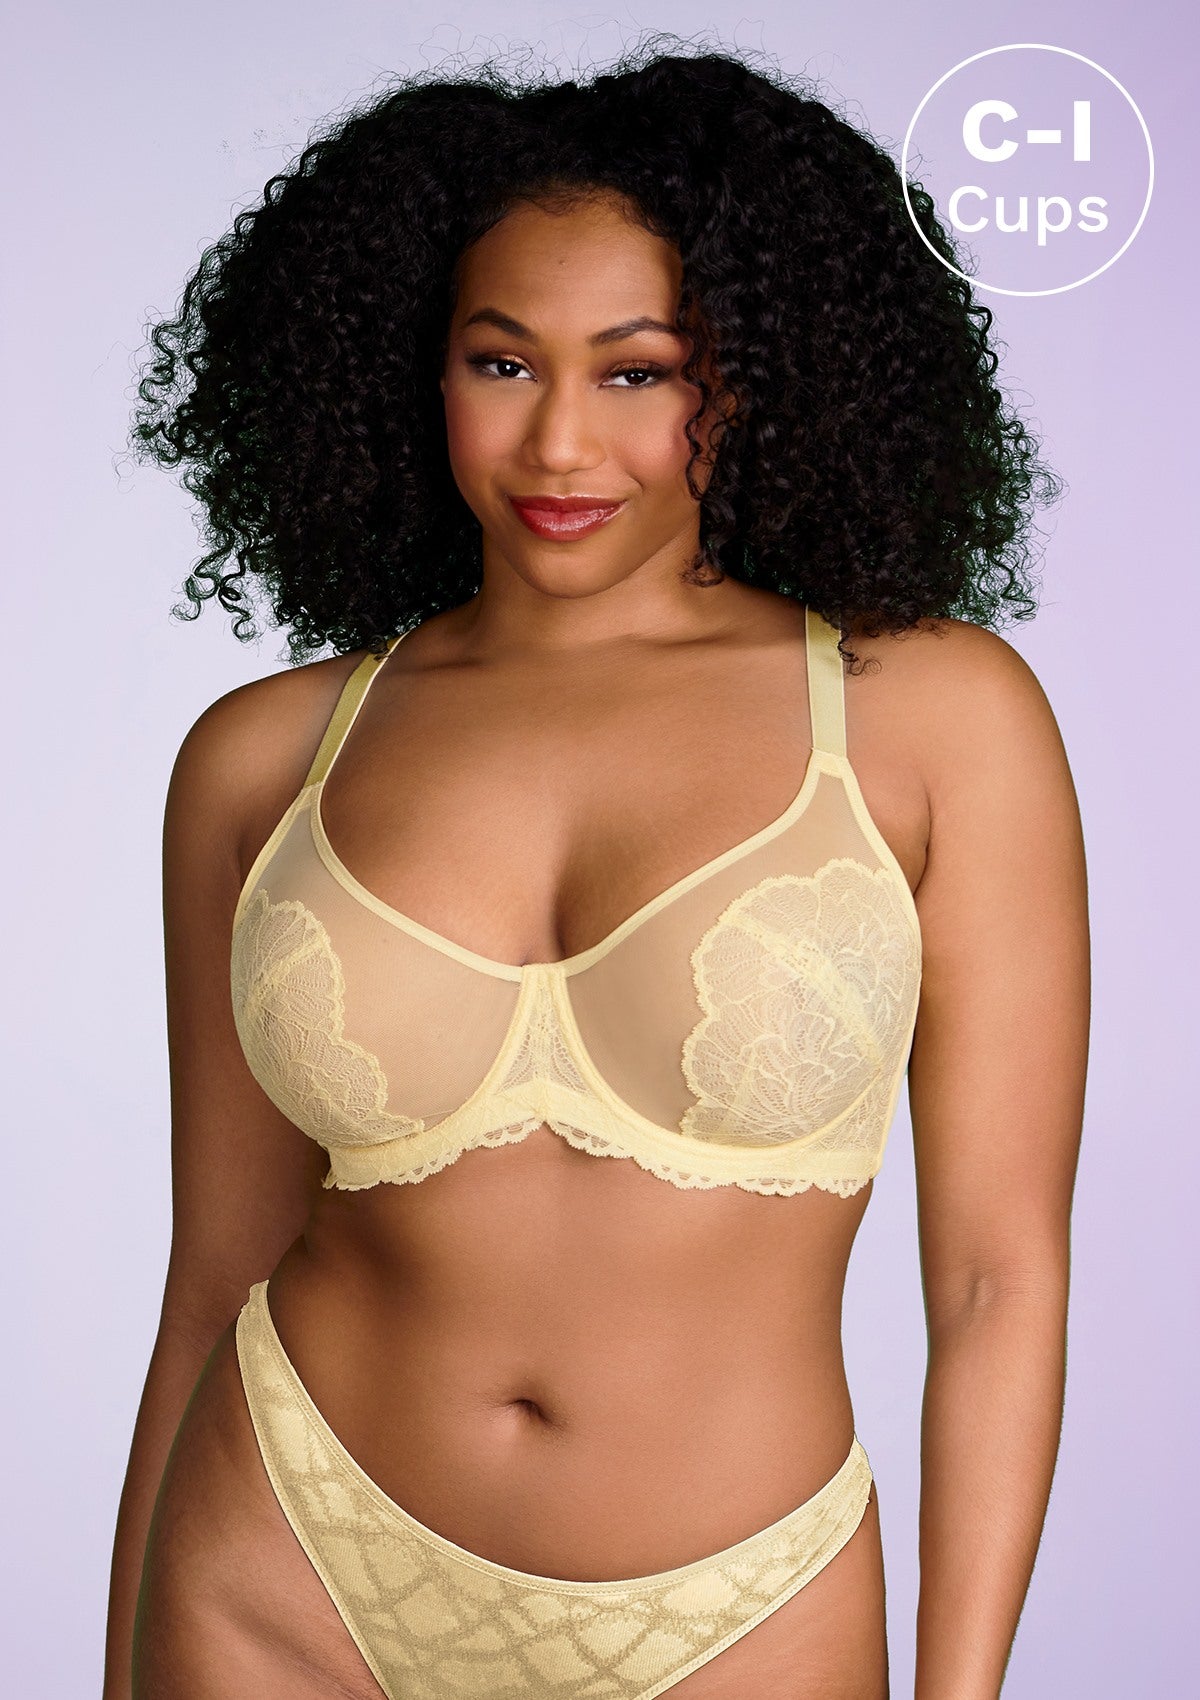 HSIA Blossom Full Coverage Side Support Bra: Designed For Heavy Busts - Beige / 42 / D